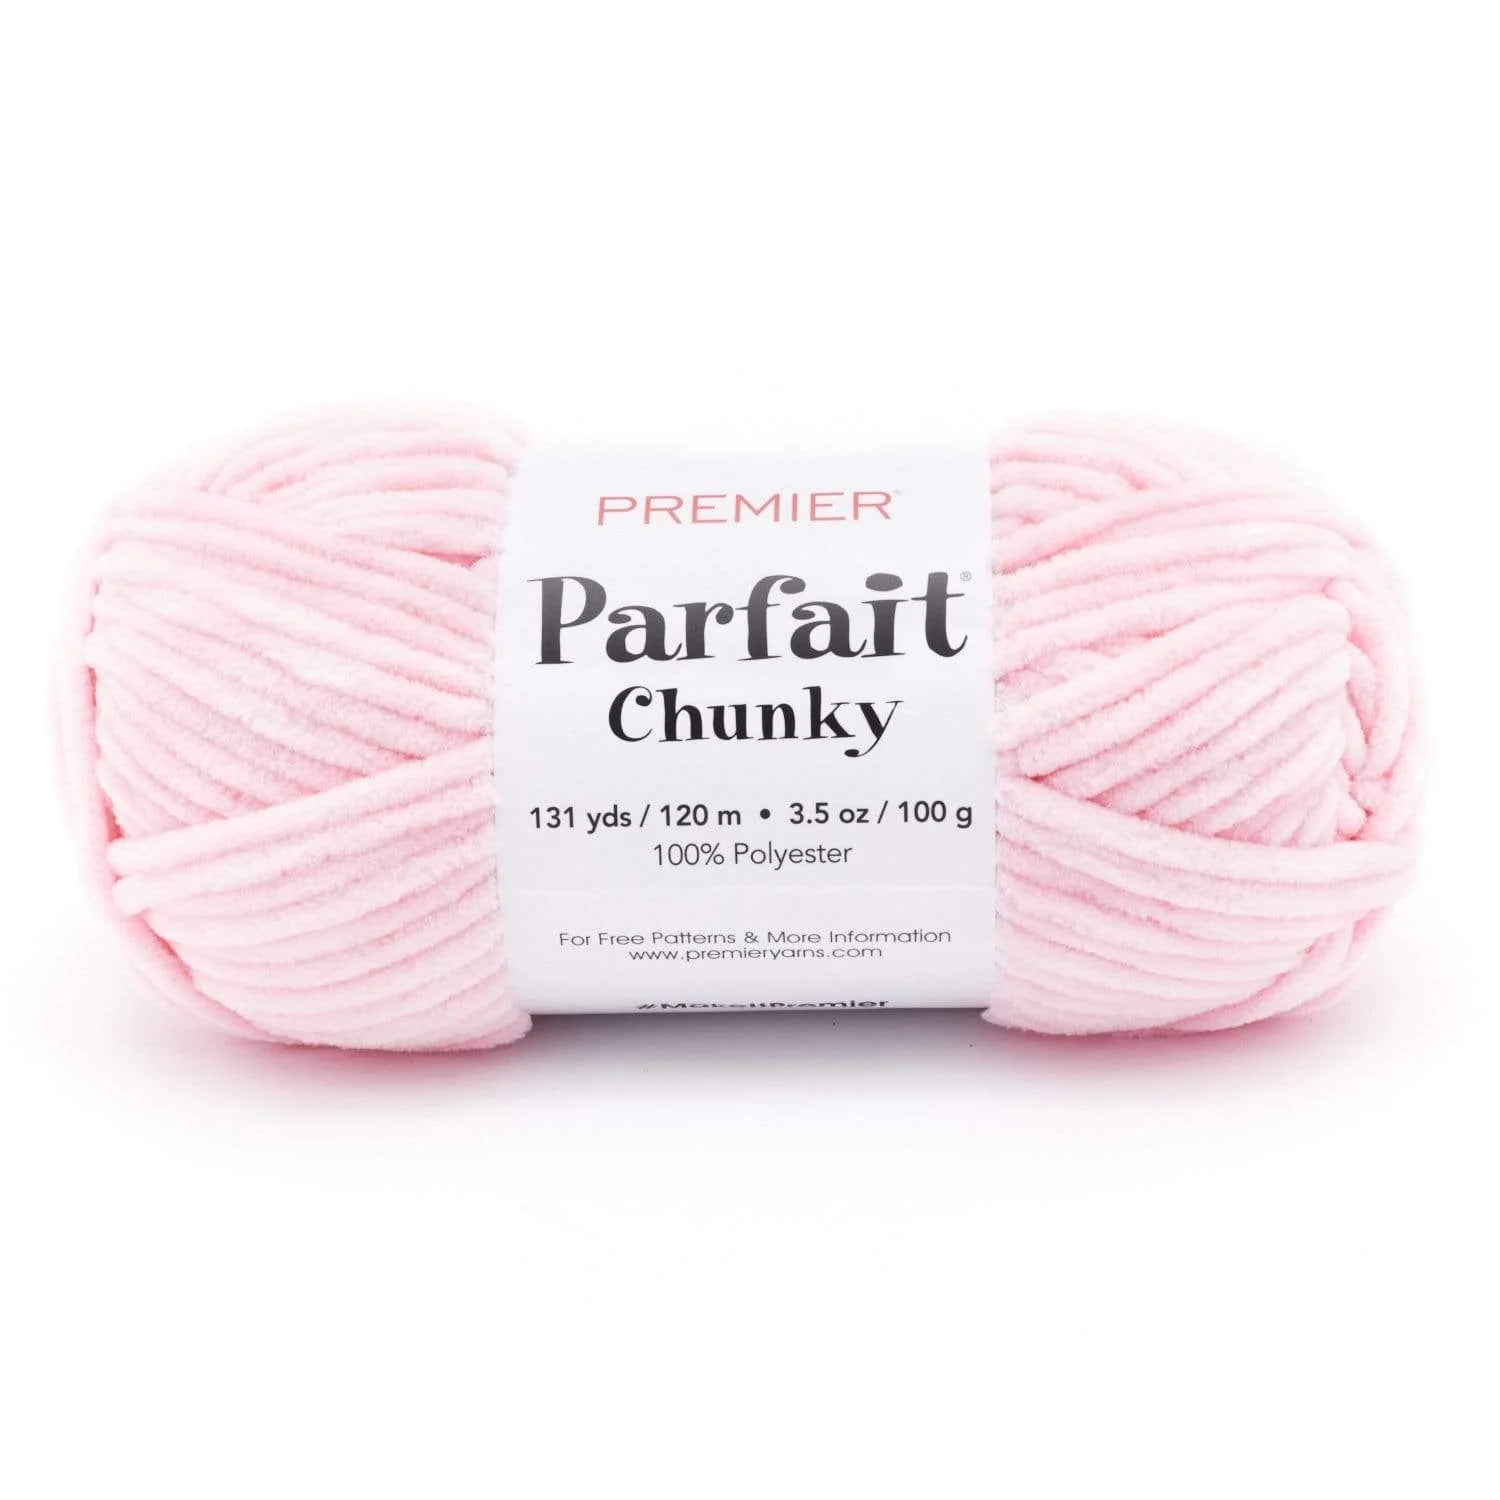 ISO premier parfait chunky yarn in sunshine. I have more coming from  premier but it takes 7+ business days so I was recommended to check here!  If anyone has some rolls they